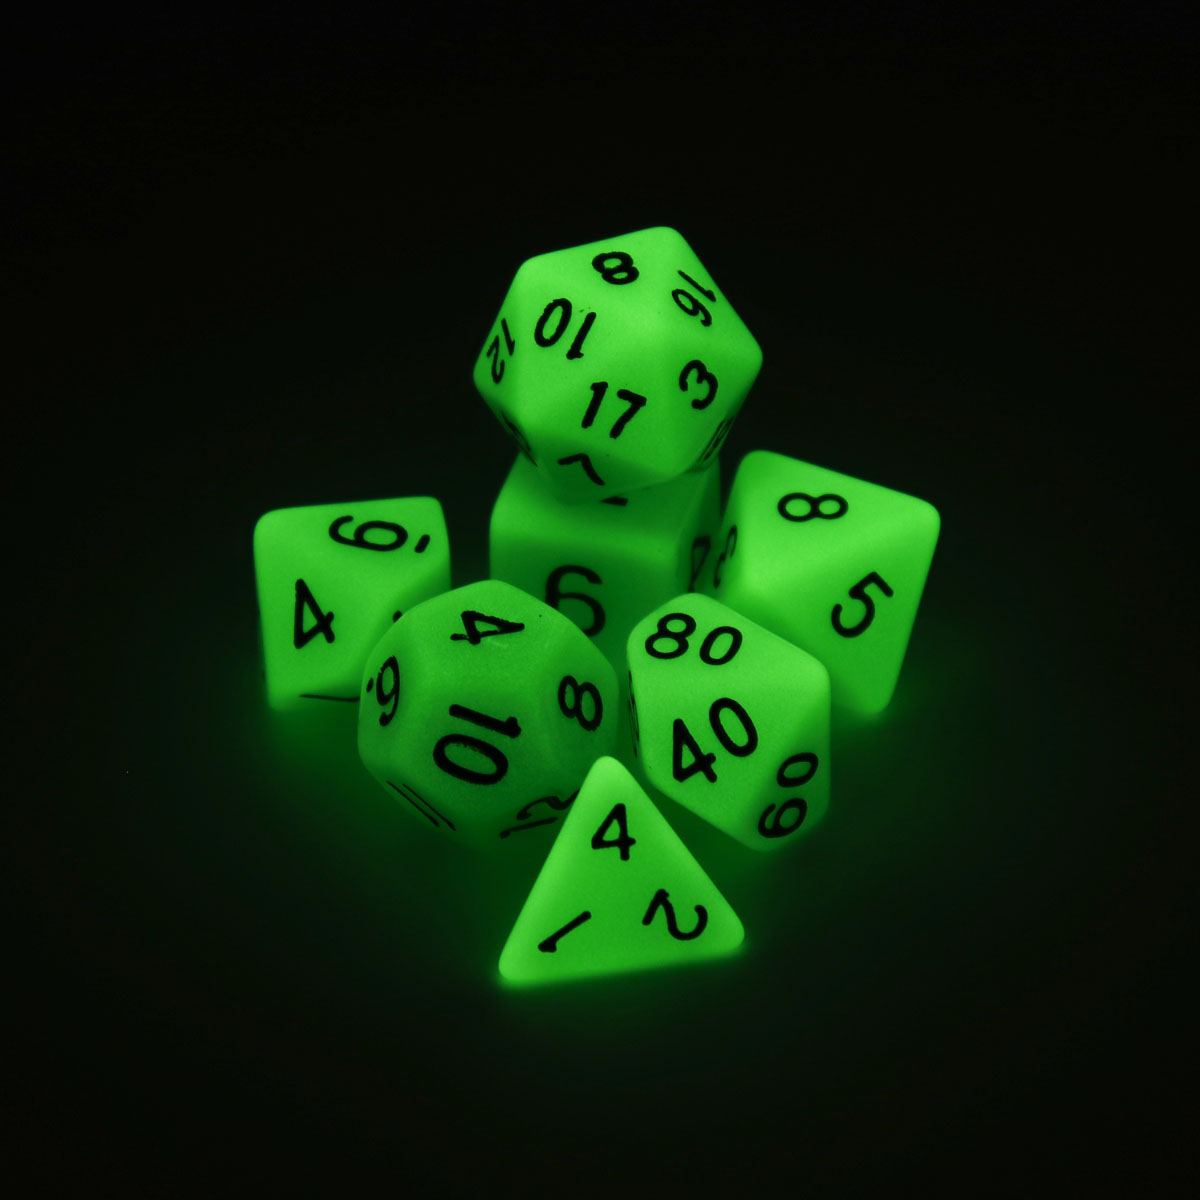 7-Pcs-Luminous-Polyhedral-Dices-Multi-sided-Dice-Set-Polyhedral-Dices-With-Dice-Cup-RPG-Gadget-1422236-10